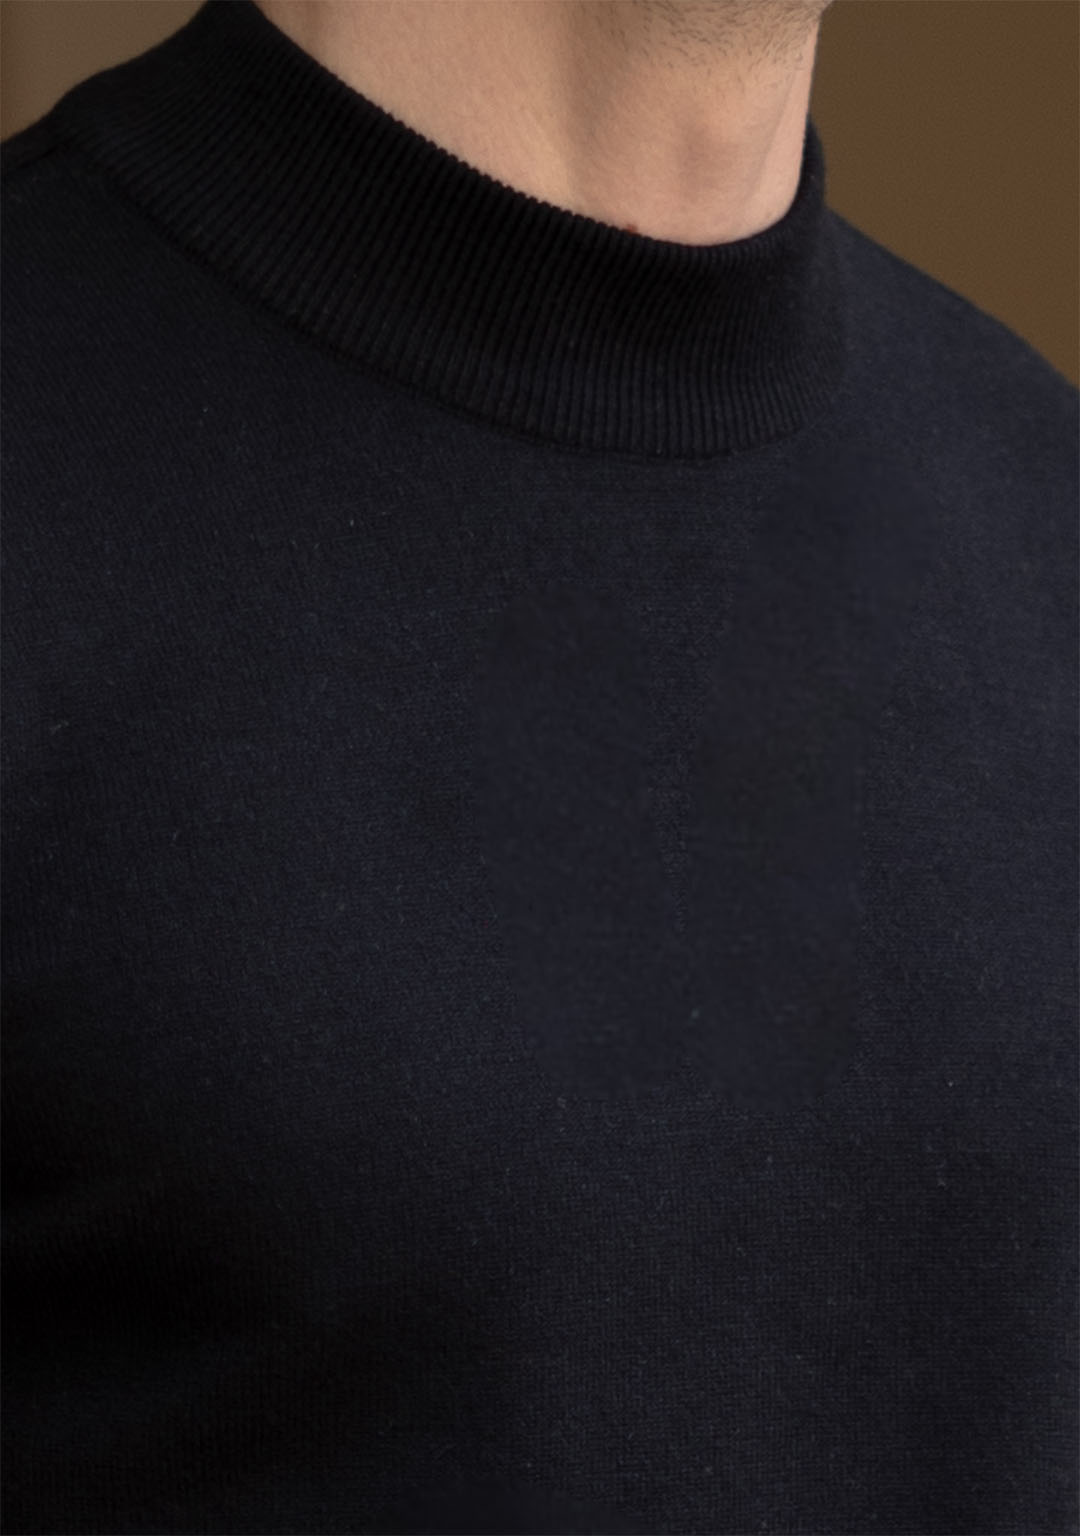 The Holland High Neck in Black